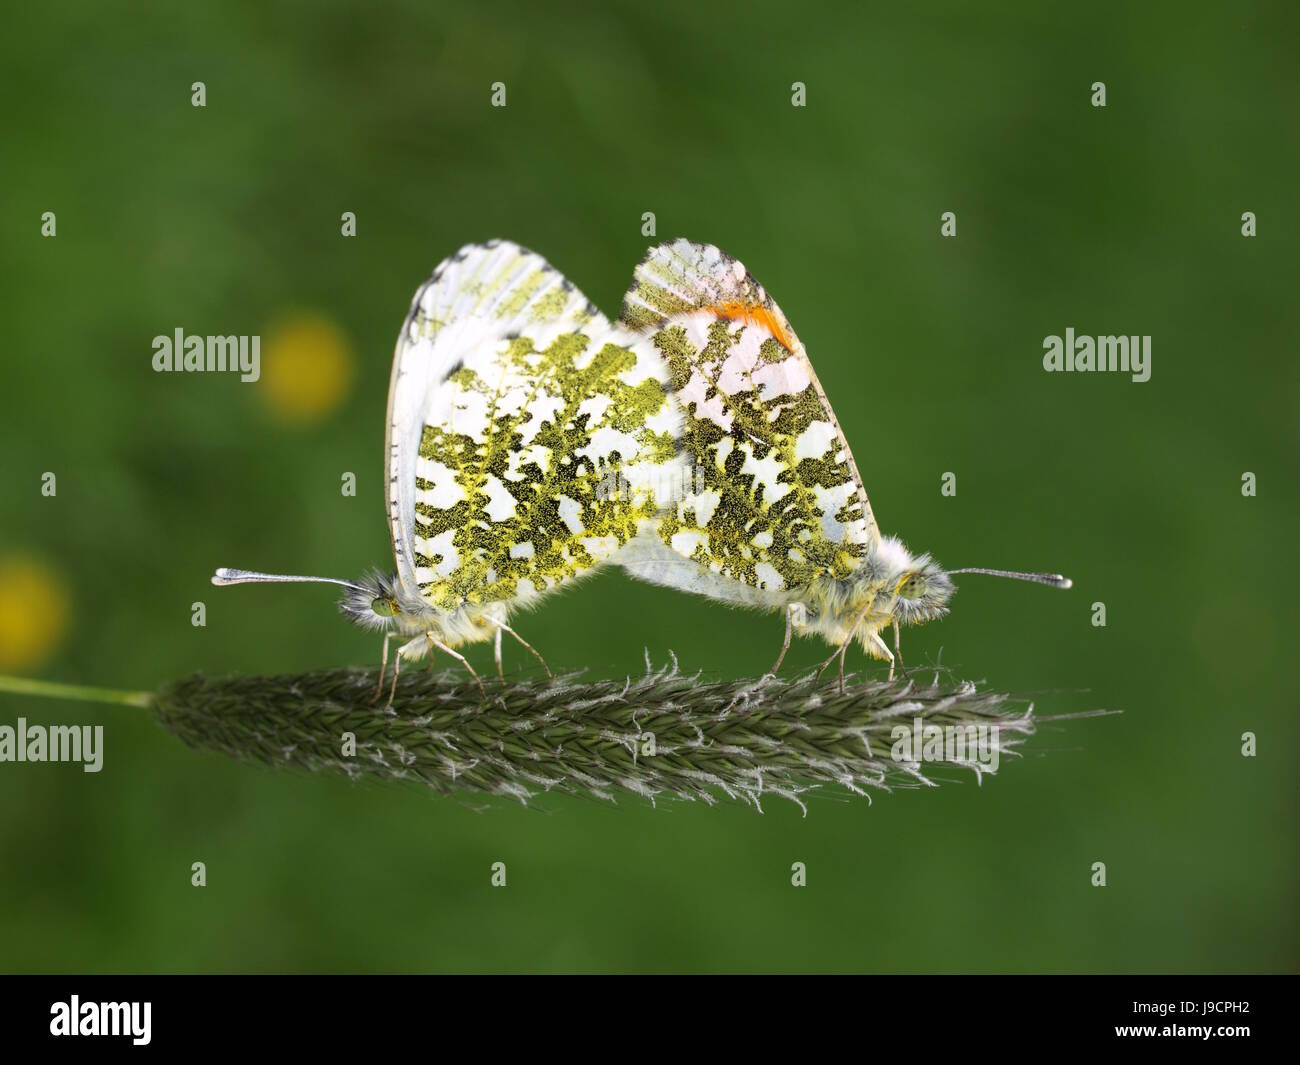 insect, butterfly, albino, garden, insect, insects, butterfly, blank, european, Stock Photo